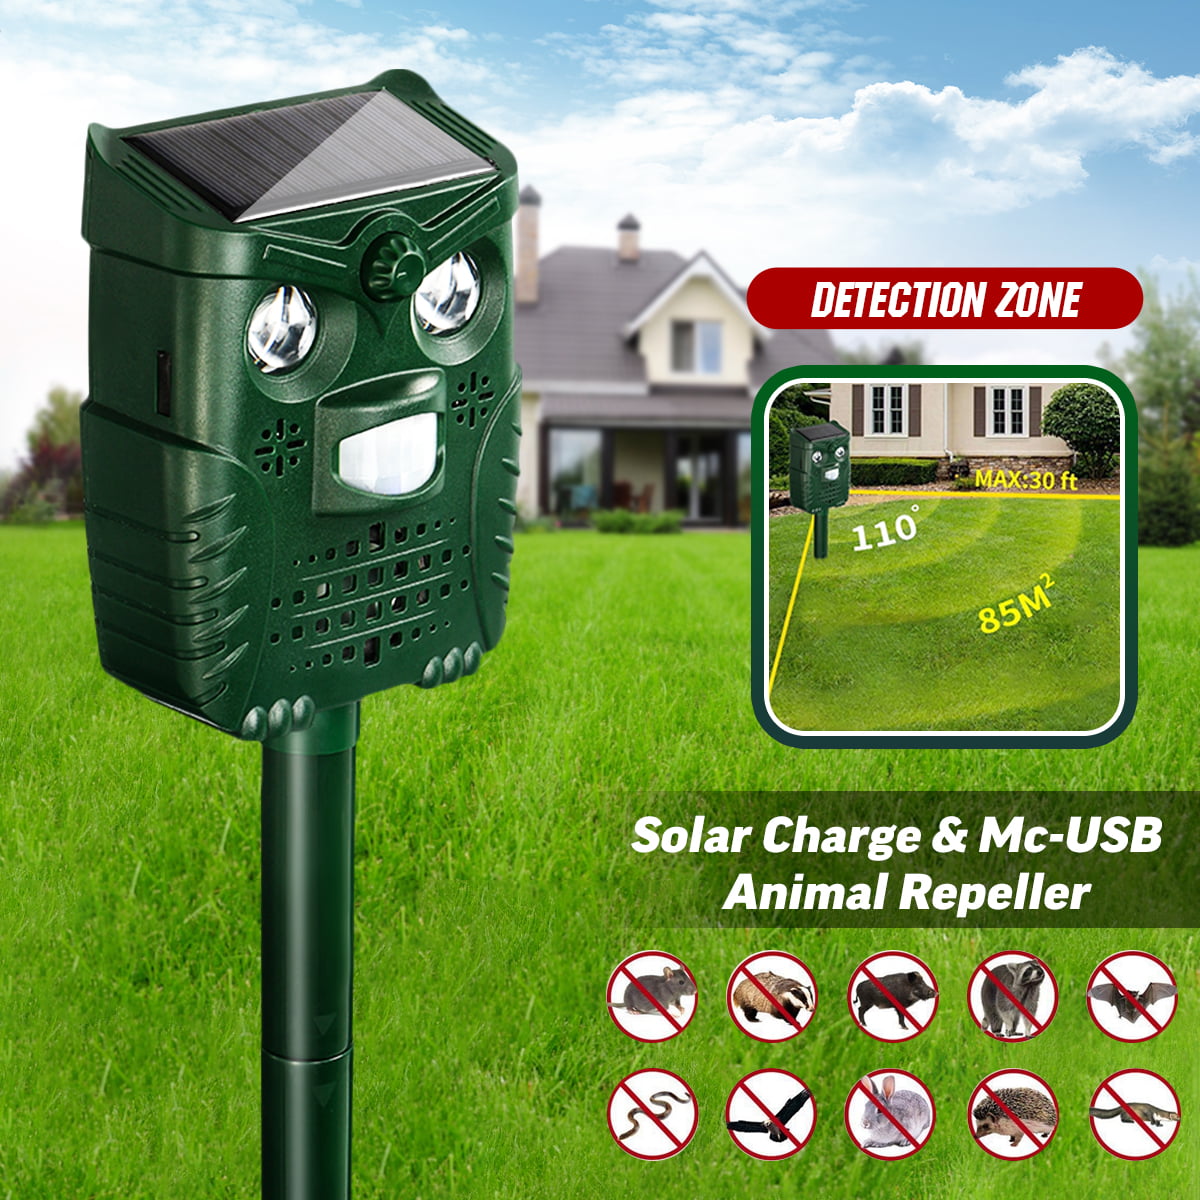 Ultrasonic Cordless Pest Repeller Cover 5000 Square Feet Cat/Dog/squirrel/insect 